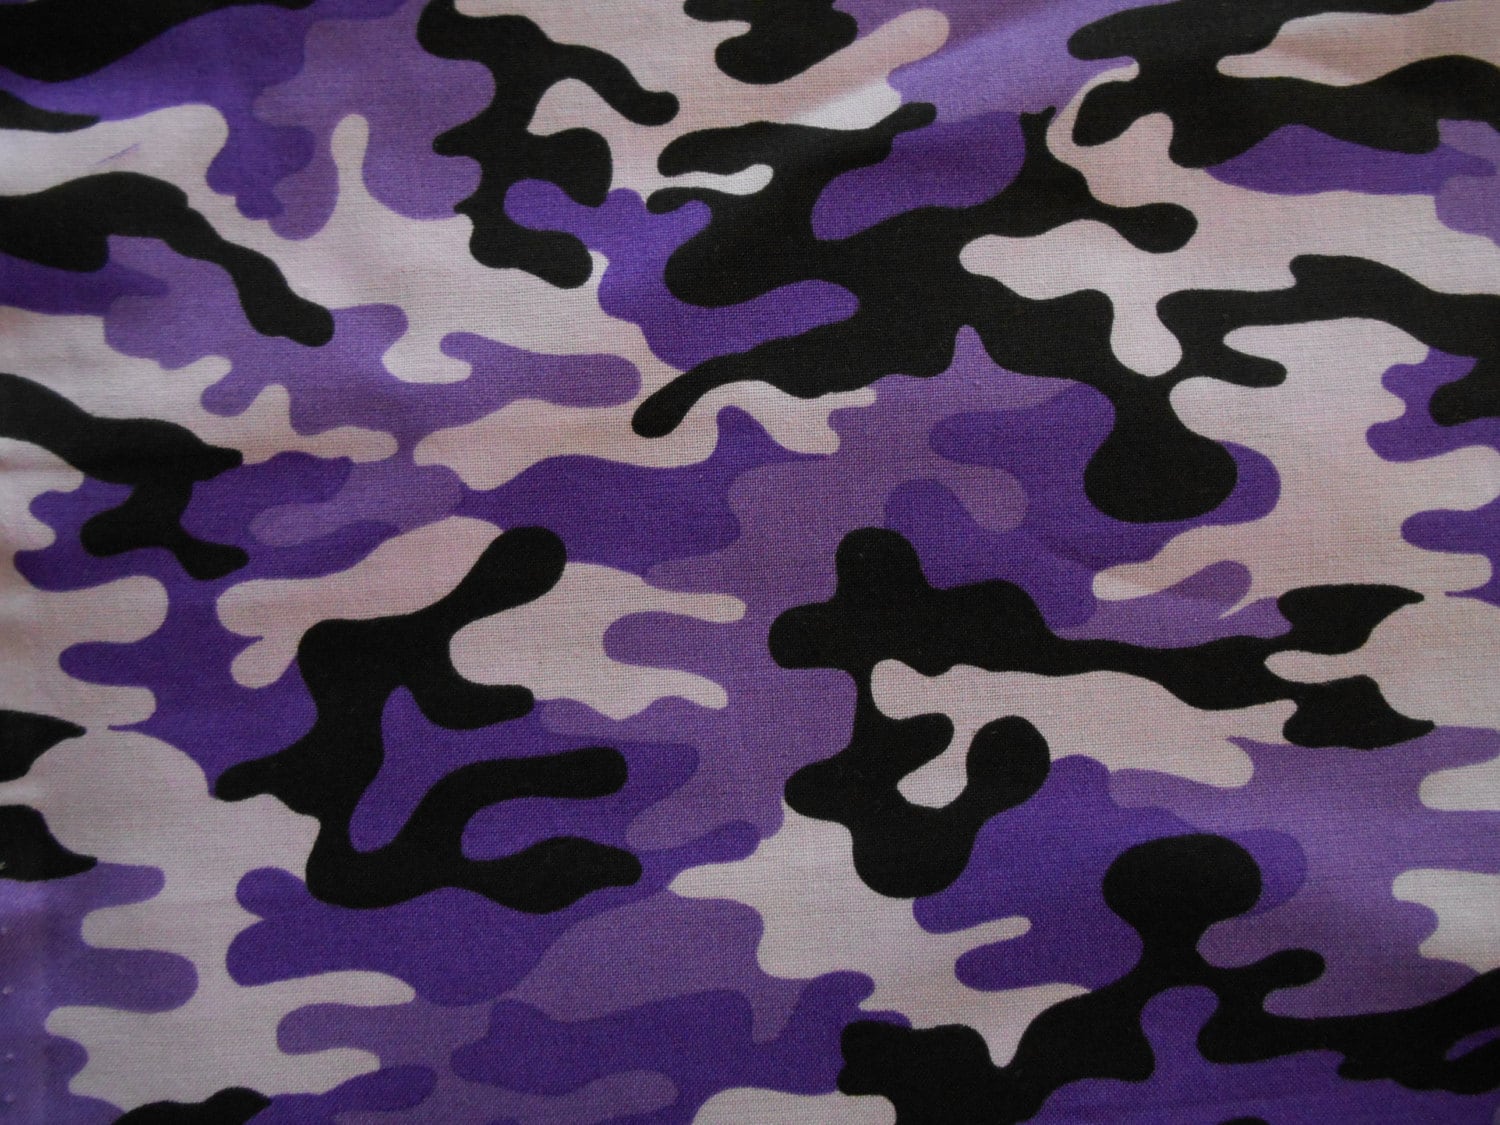 Purple Camo cotton fabric by the yard from RDFabrics on Etsy Studio